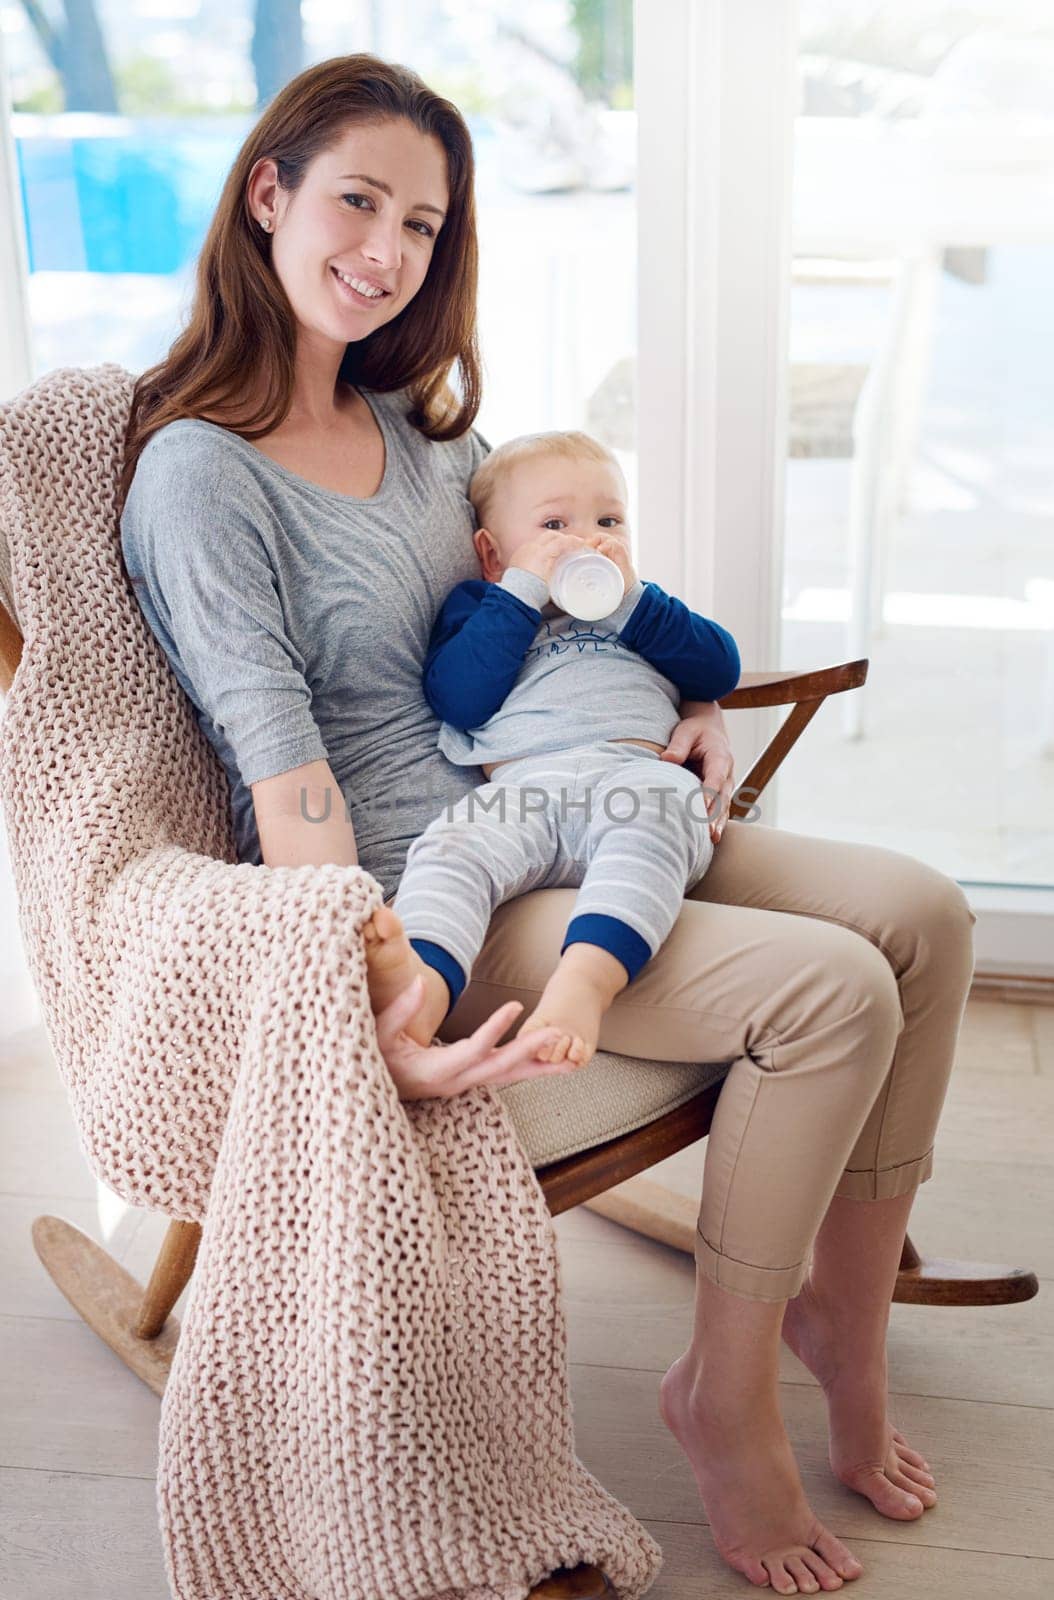 Mom, baby and smile in chair for support, love and cute as toddler for growth and child development. Woman, kid and happy at home with bottle for bonding, childhood memories and fun in portrait.